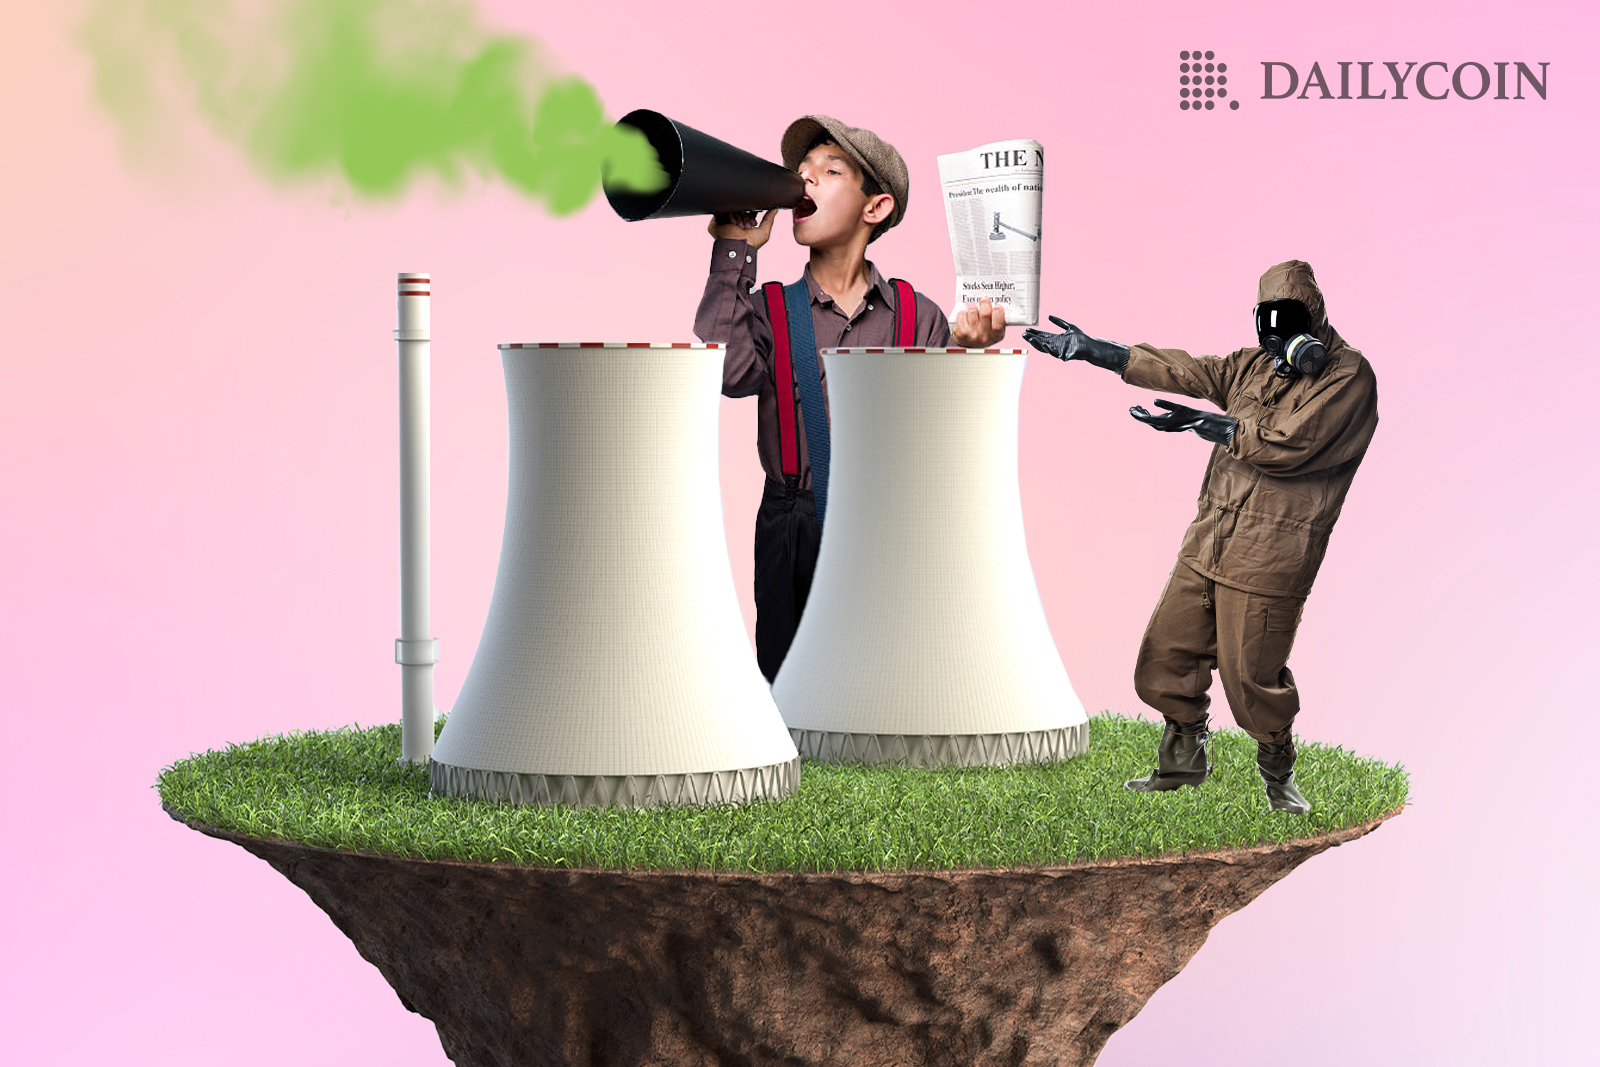 A tiny floating island with factory built on top and a man in a hazard suit in front of a child holding a megaphone with green smoke coming out of it.